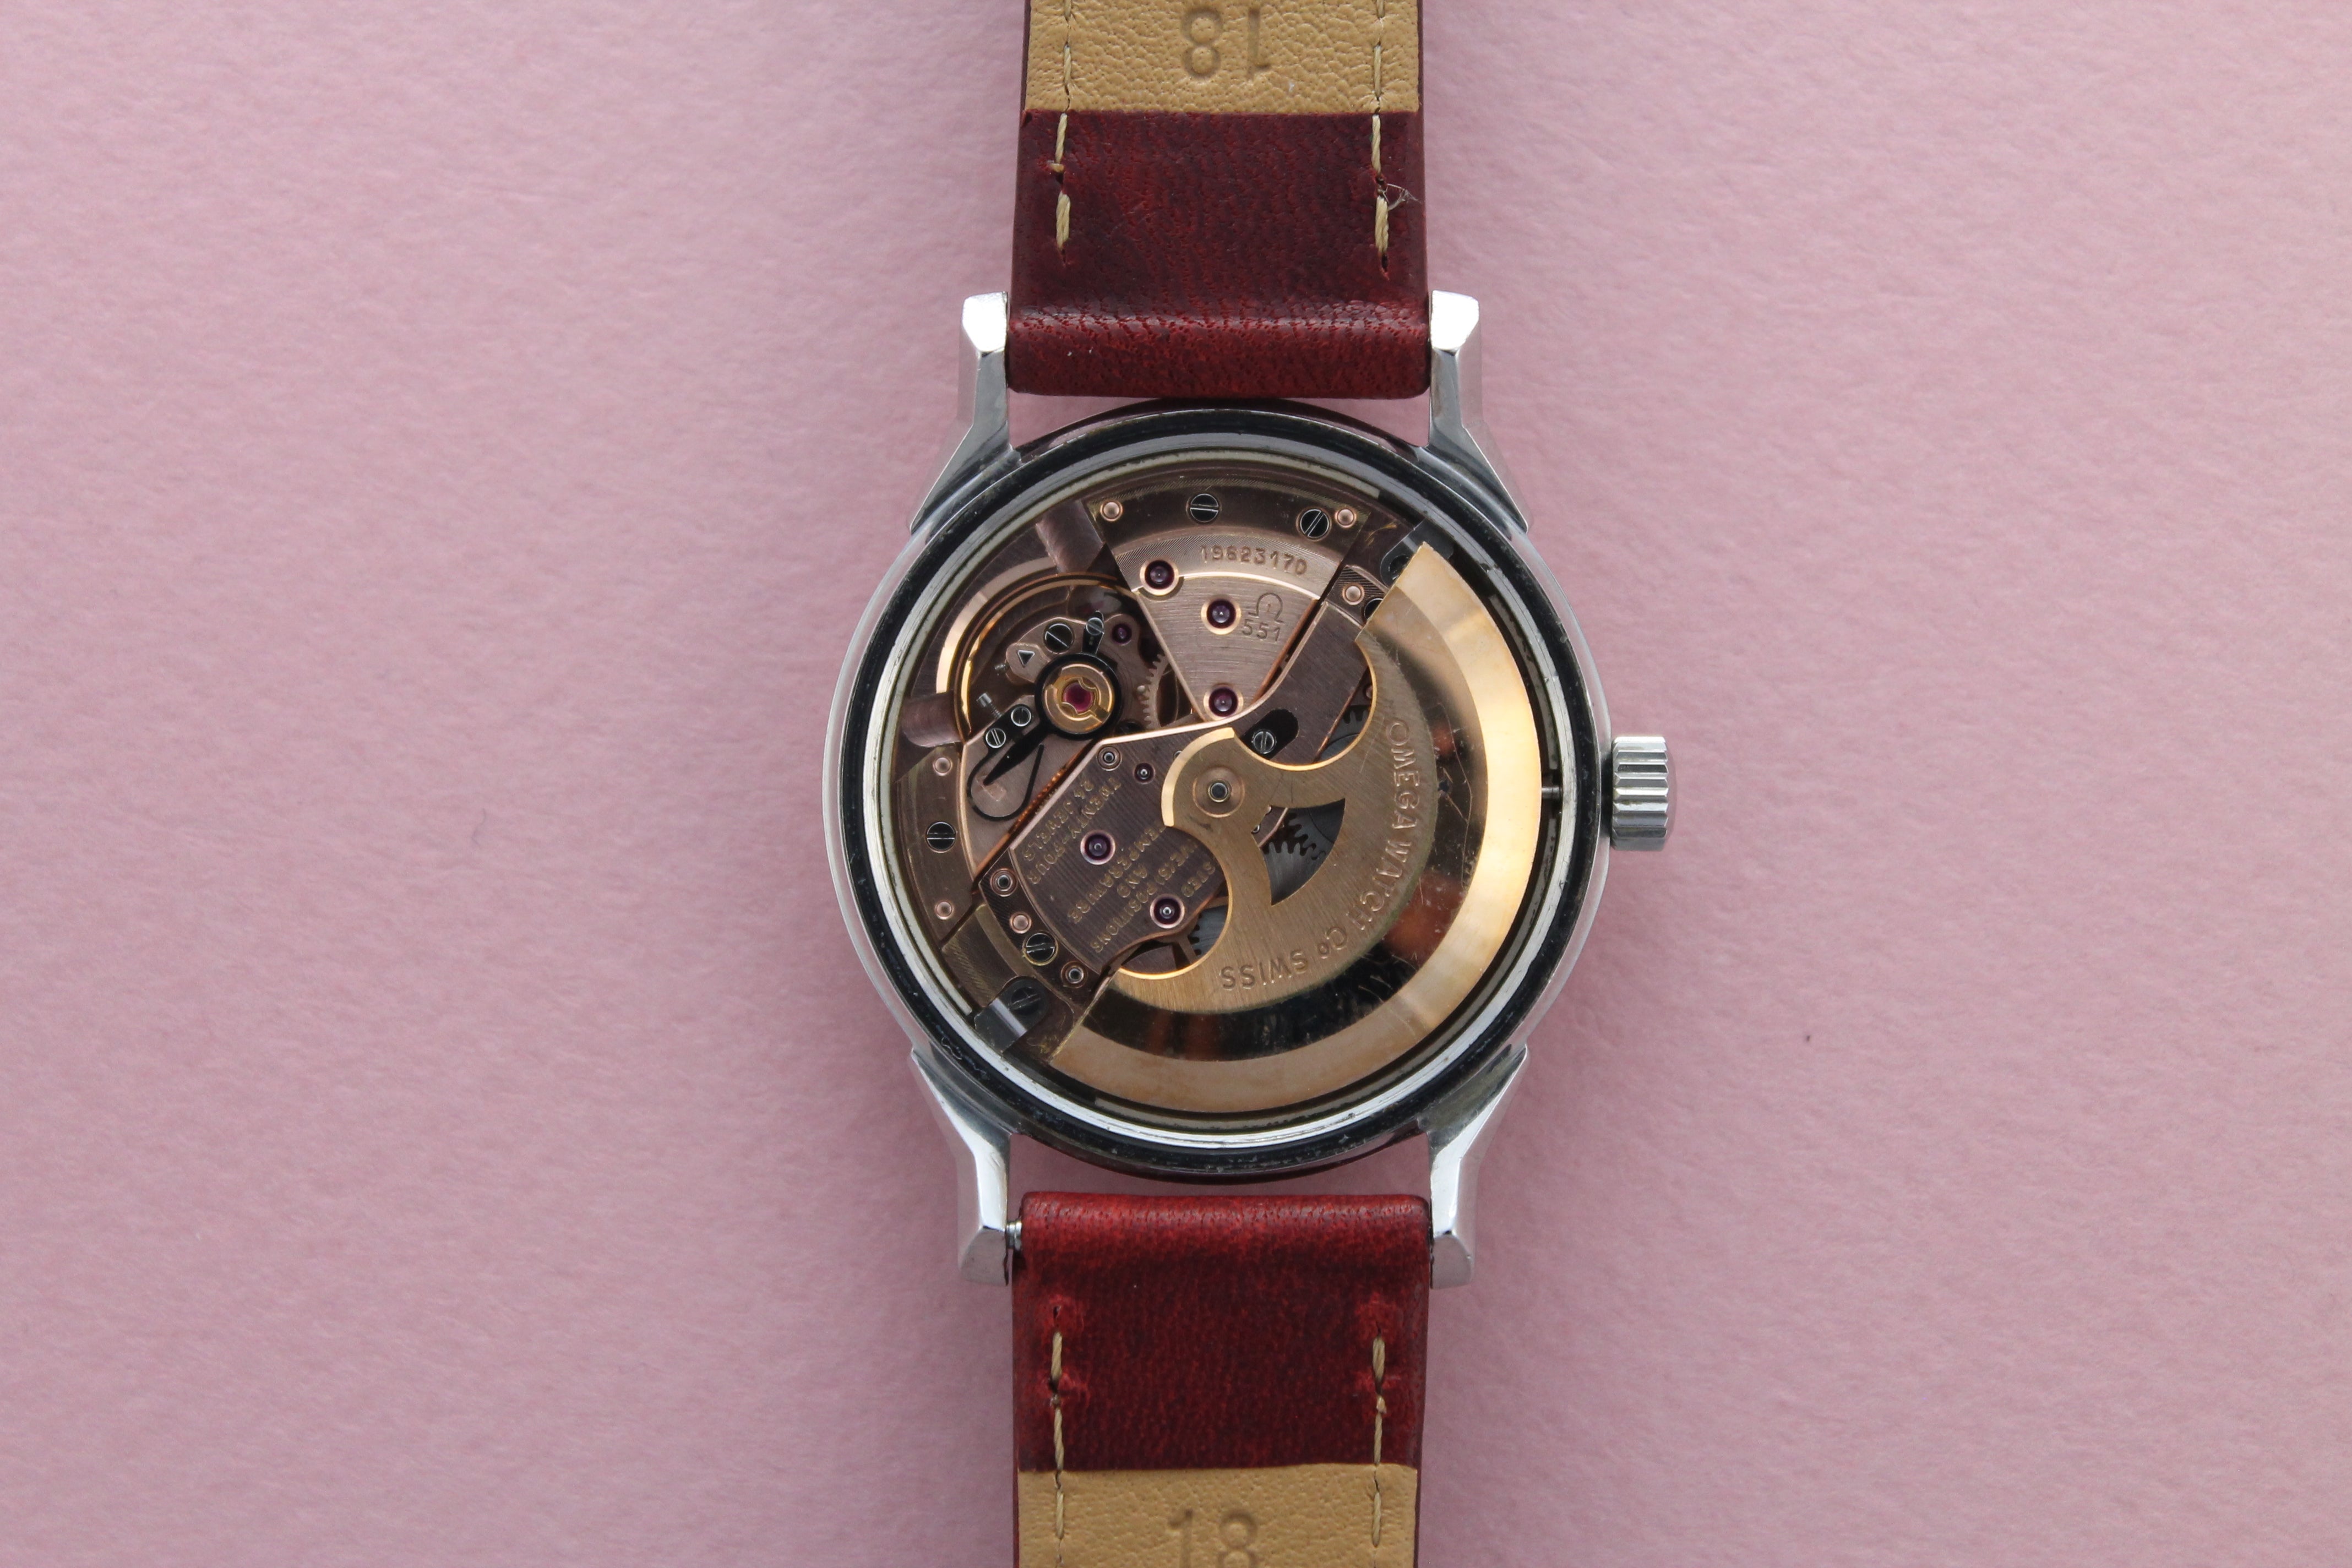 OMEGA Automatic Chronometer "Pie Pan" Constellation Cal 551 (1962)